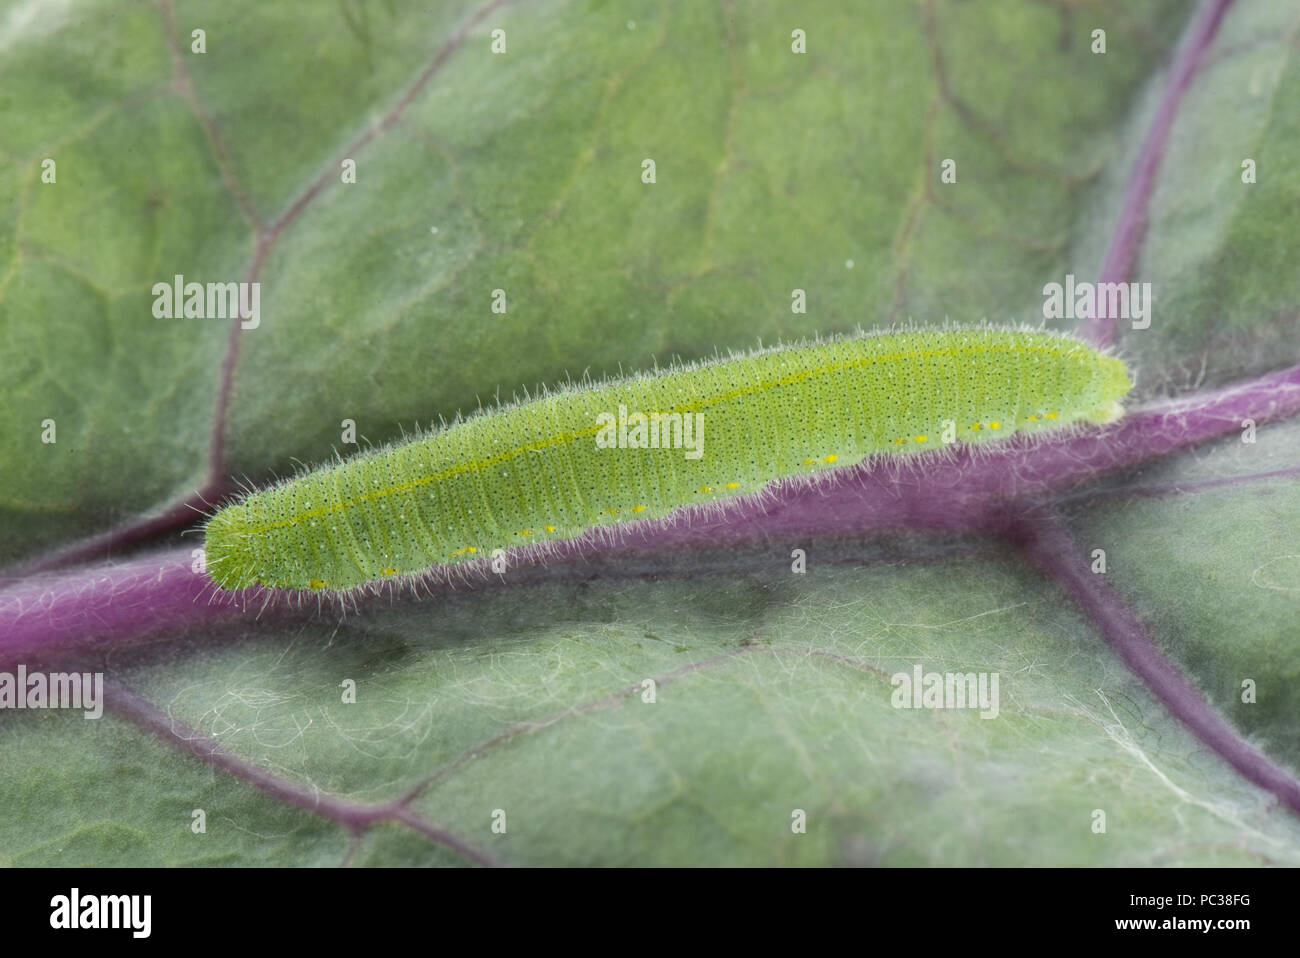 Small white butterfly, Pieris rapae, caterpillar feeding on the leaves of a purple variety of brussel sprouts, July Stock Photo